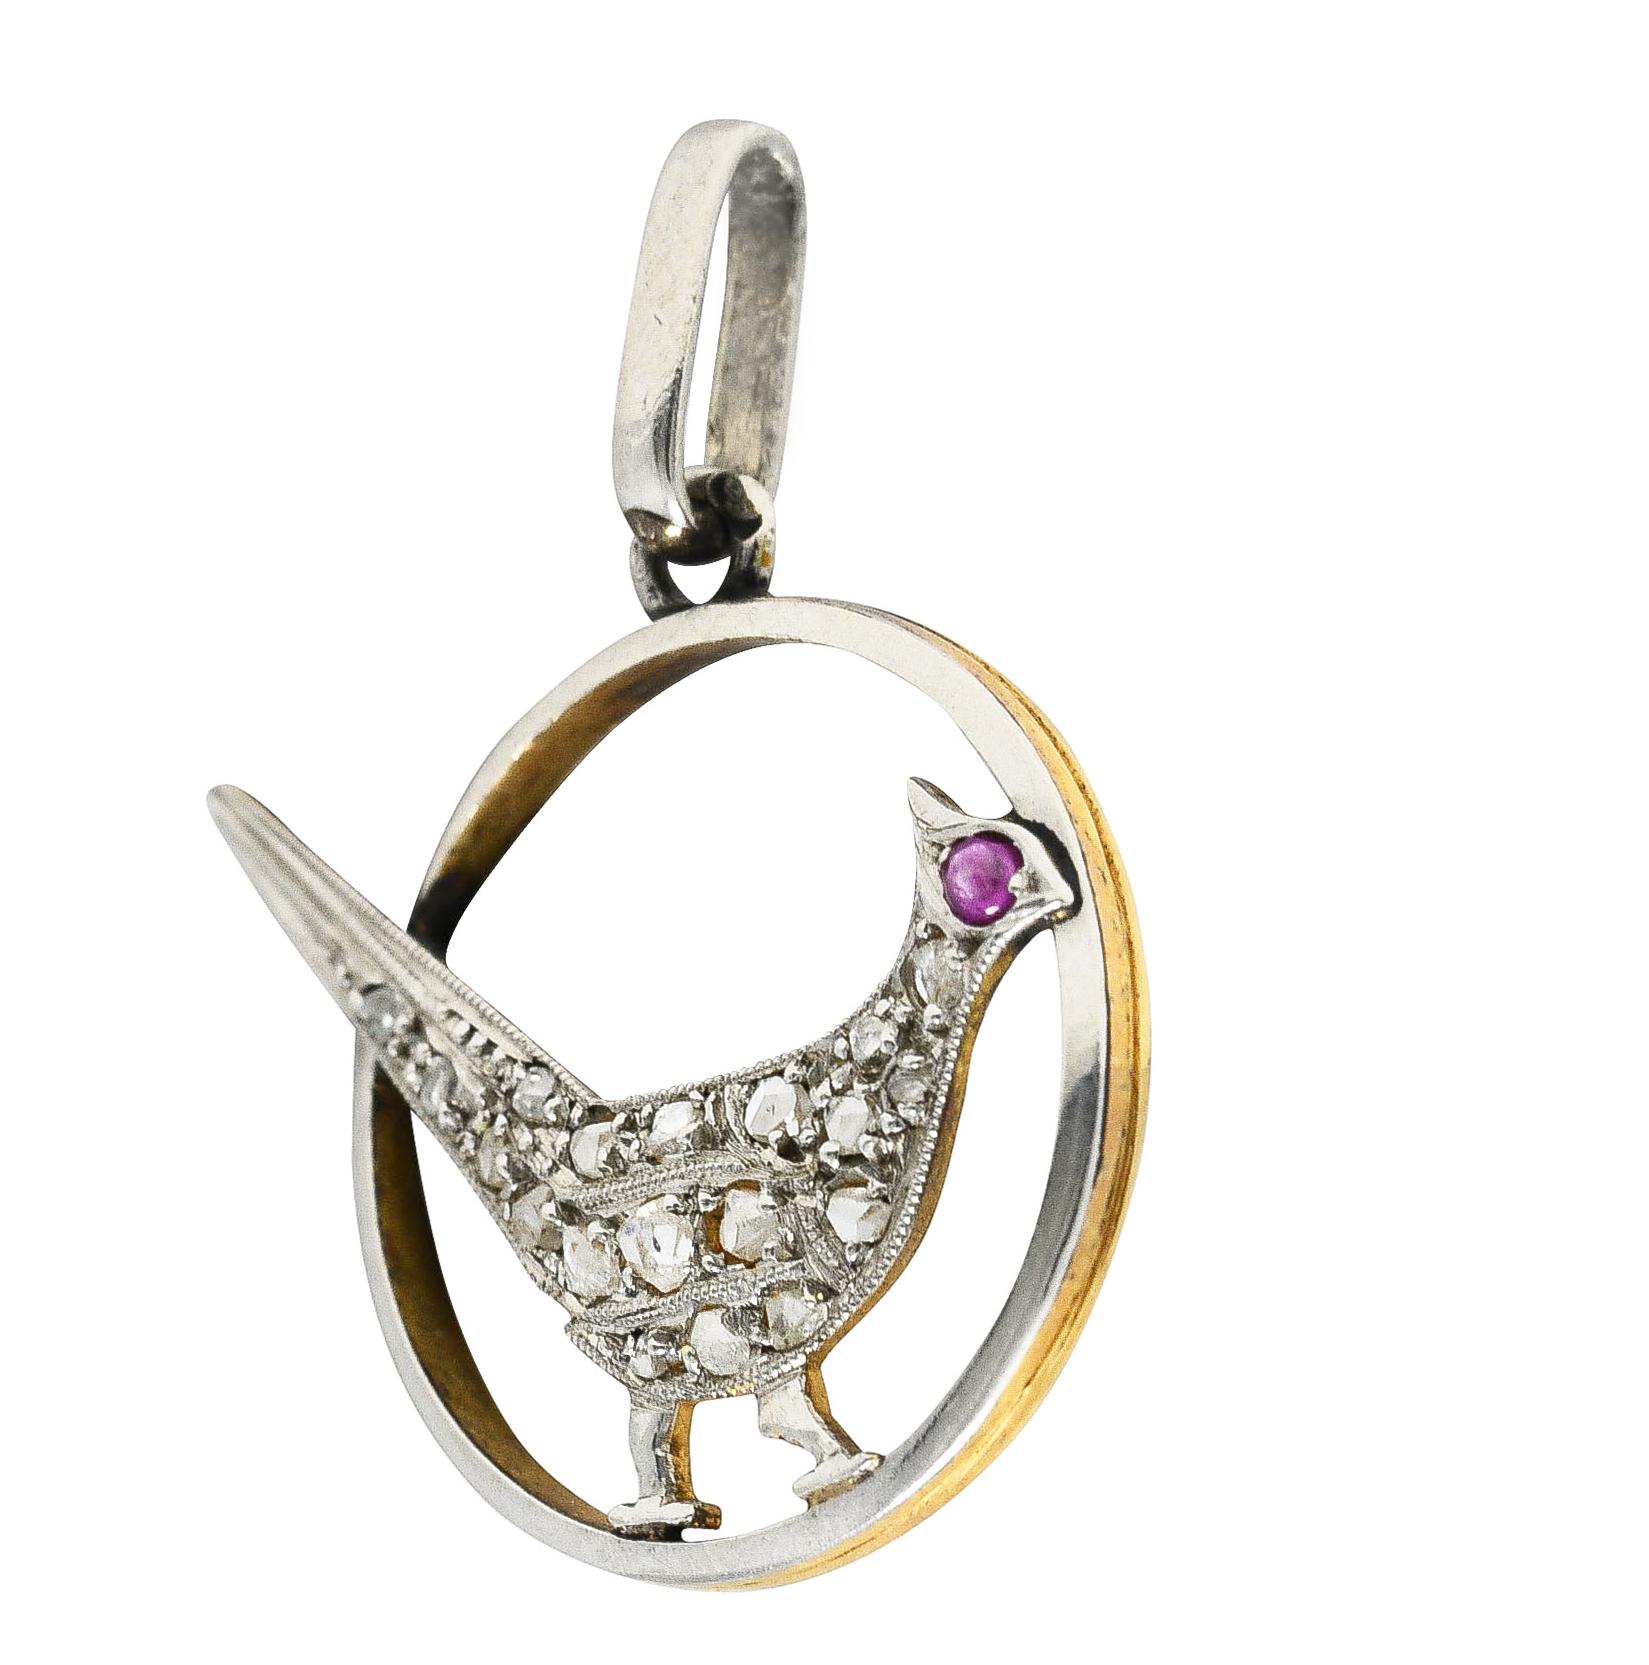 Designed as a perched bird within a circular frame. Bead set throughout with rose cut diamonds.
Weighing approximately 0.30 carat total. Quality consistent with cut and age. Accented by a ruby cabochon eye. Transparent bright purplish-red. Tested as